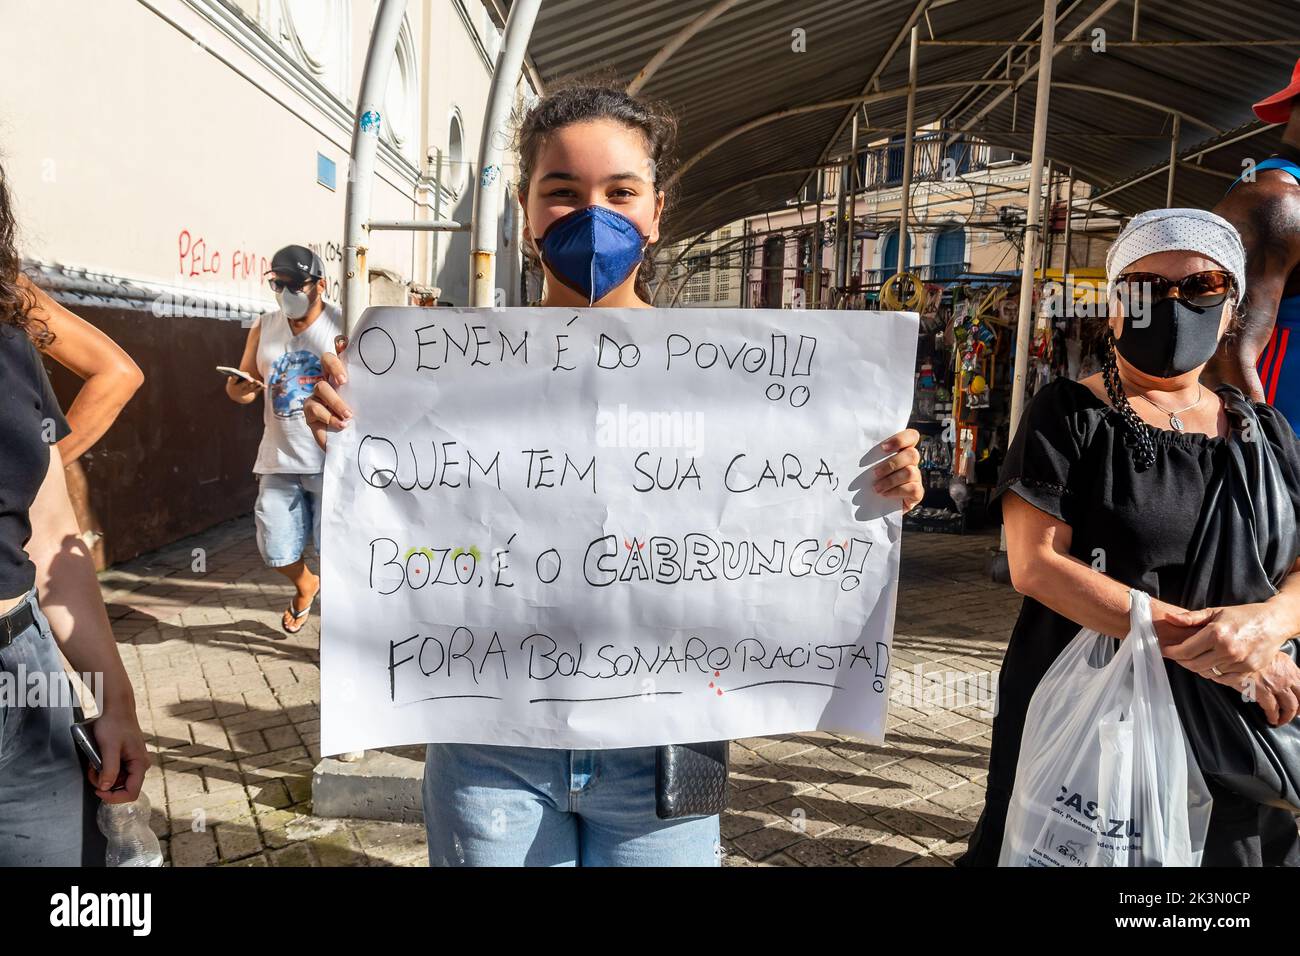 Salvador, Bahia, Brazil - November 20, 2021: Brazilians protest carrying posters against the government of President Jair Bolsonaro in the city of Sal Stock Photo